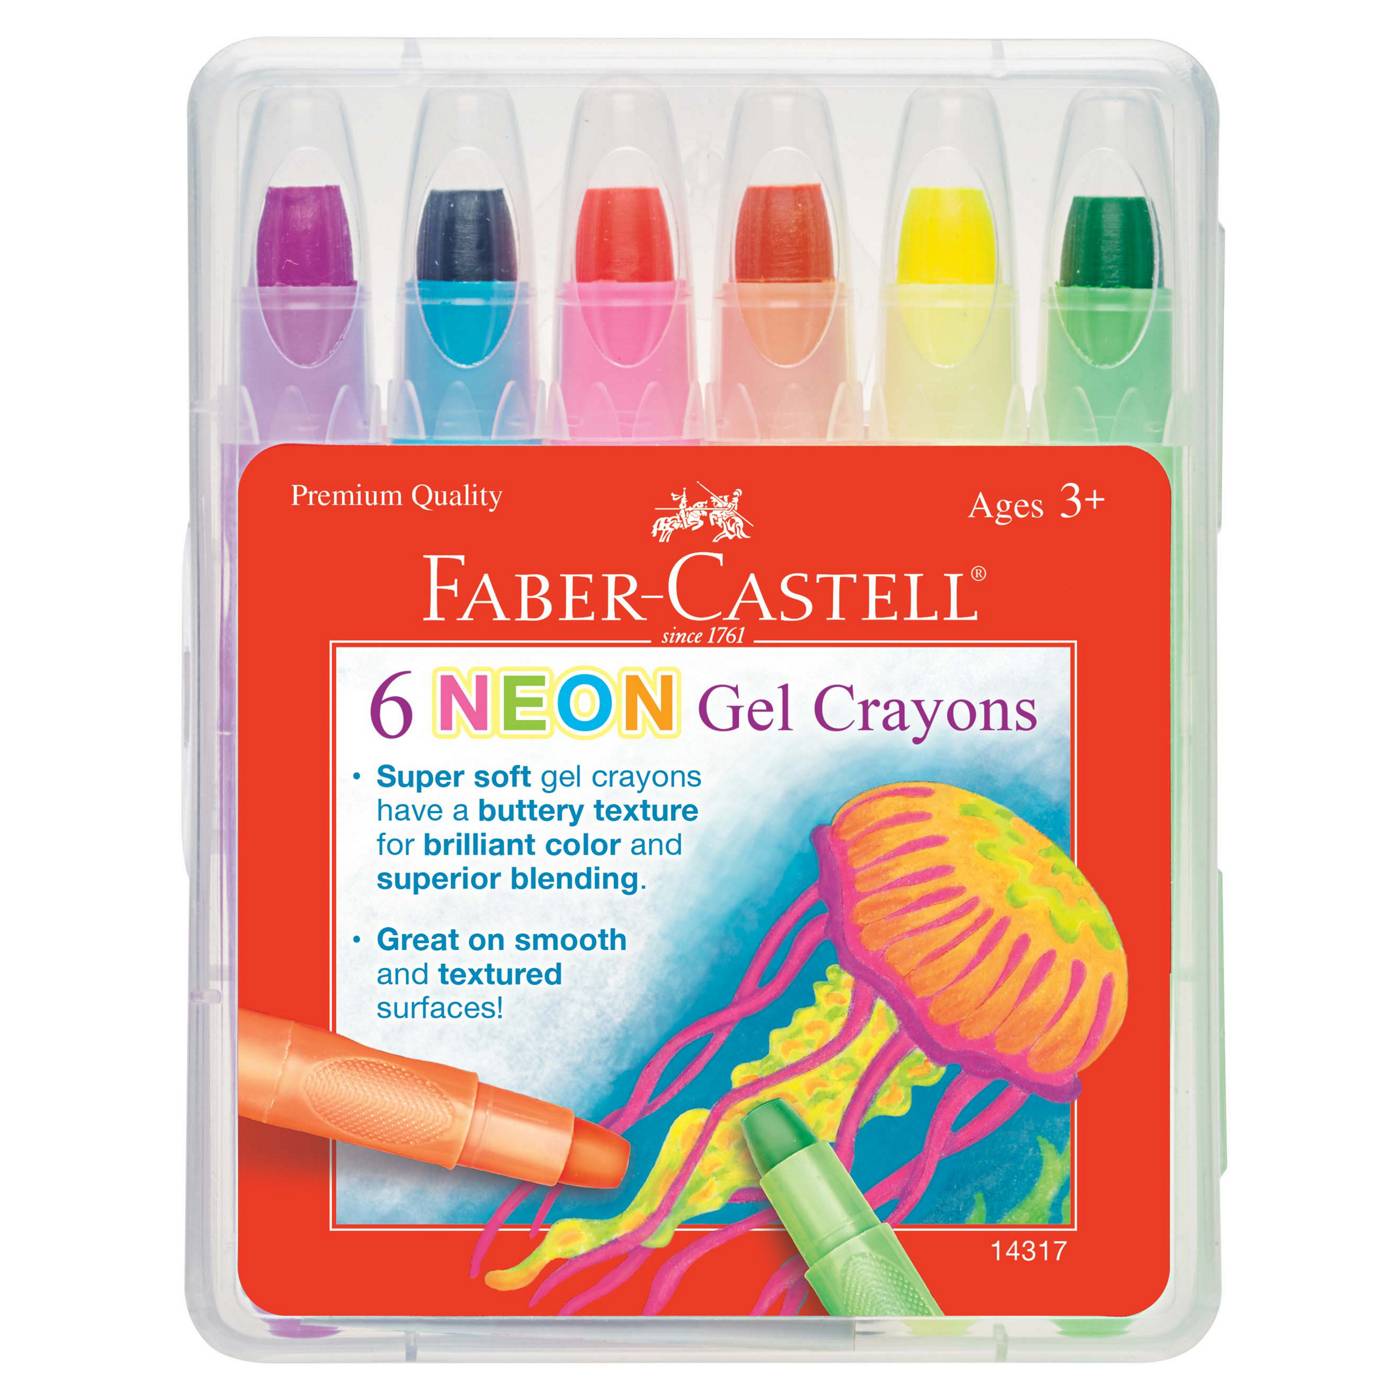 Faber-Castell Neon Gel Crayons; image 1 of 3